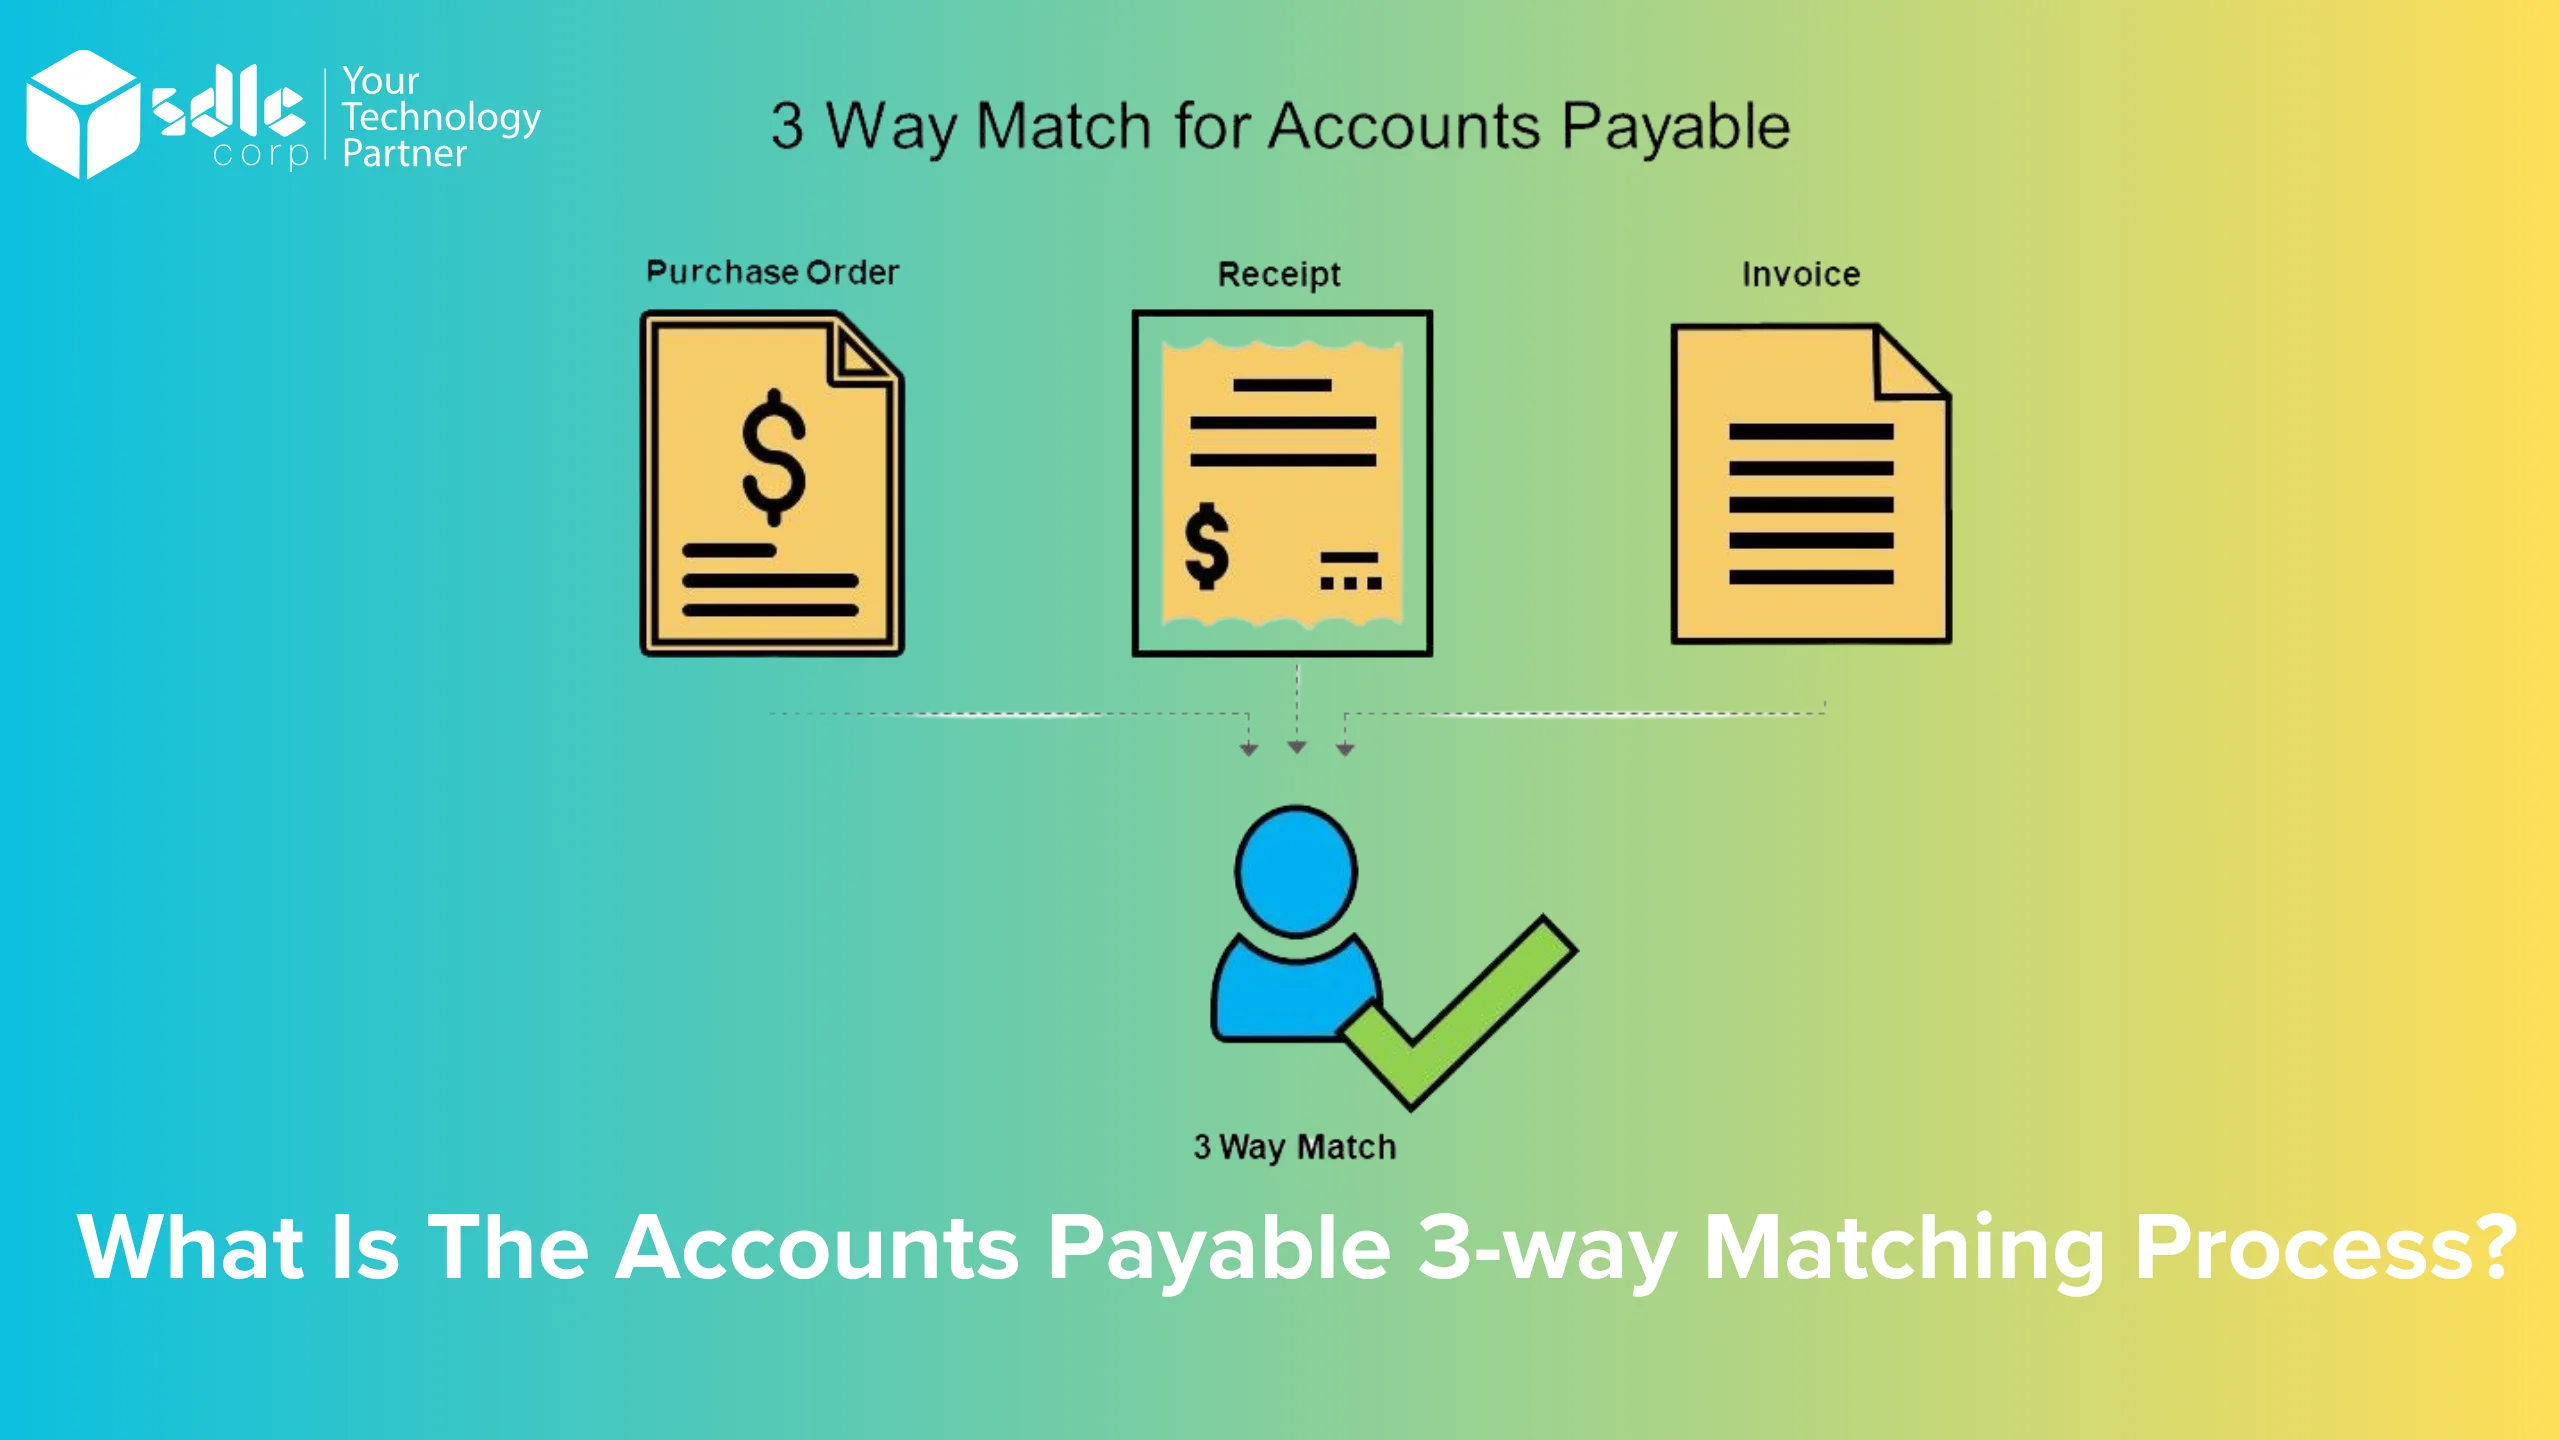 What Is the Accounts Payable 3-Way Matching Process